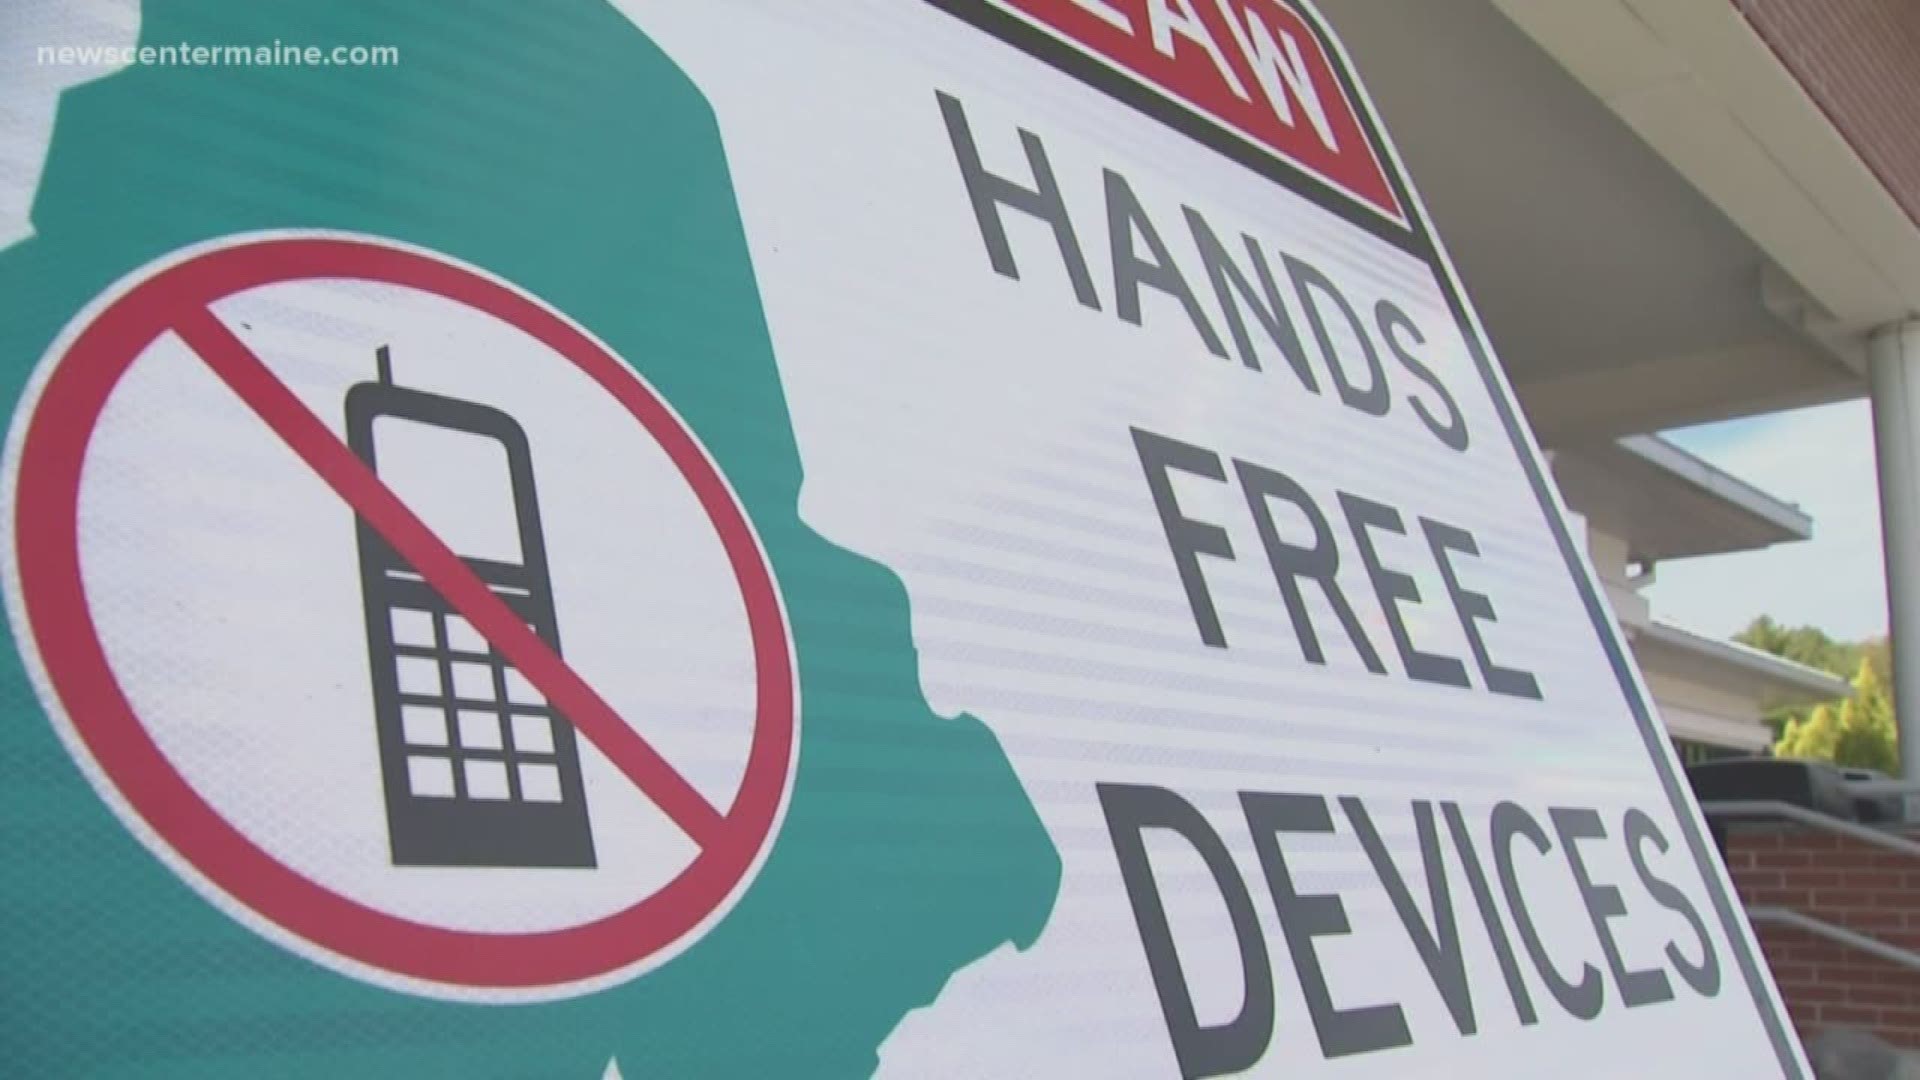 The law that prohibits the use of hand-held phones and other devices while driving went into effect last week